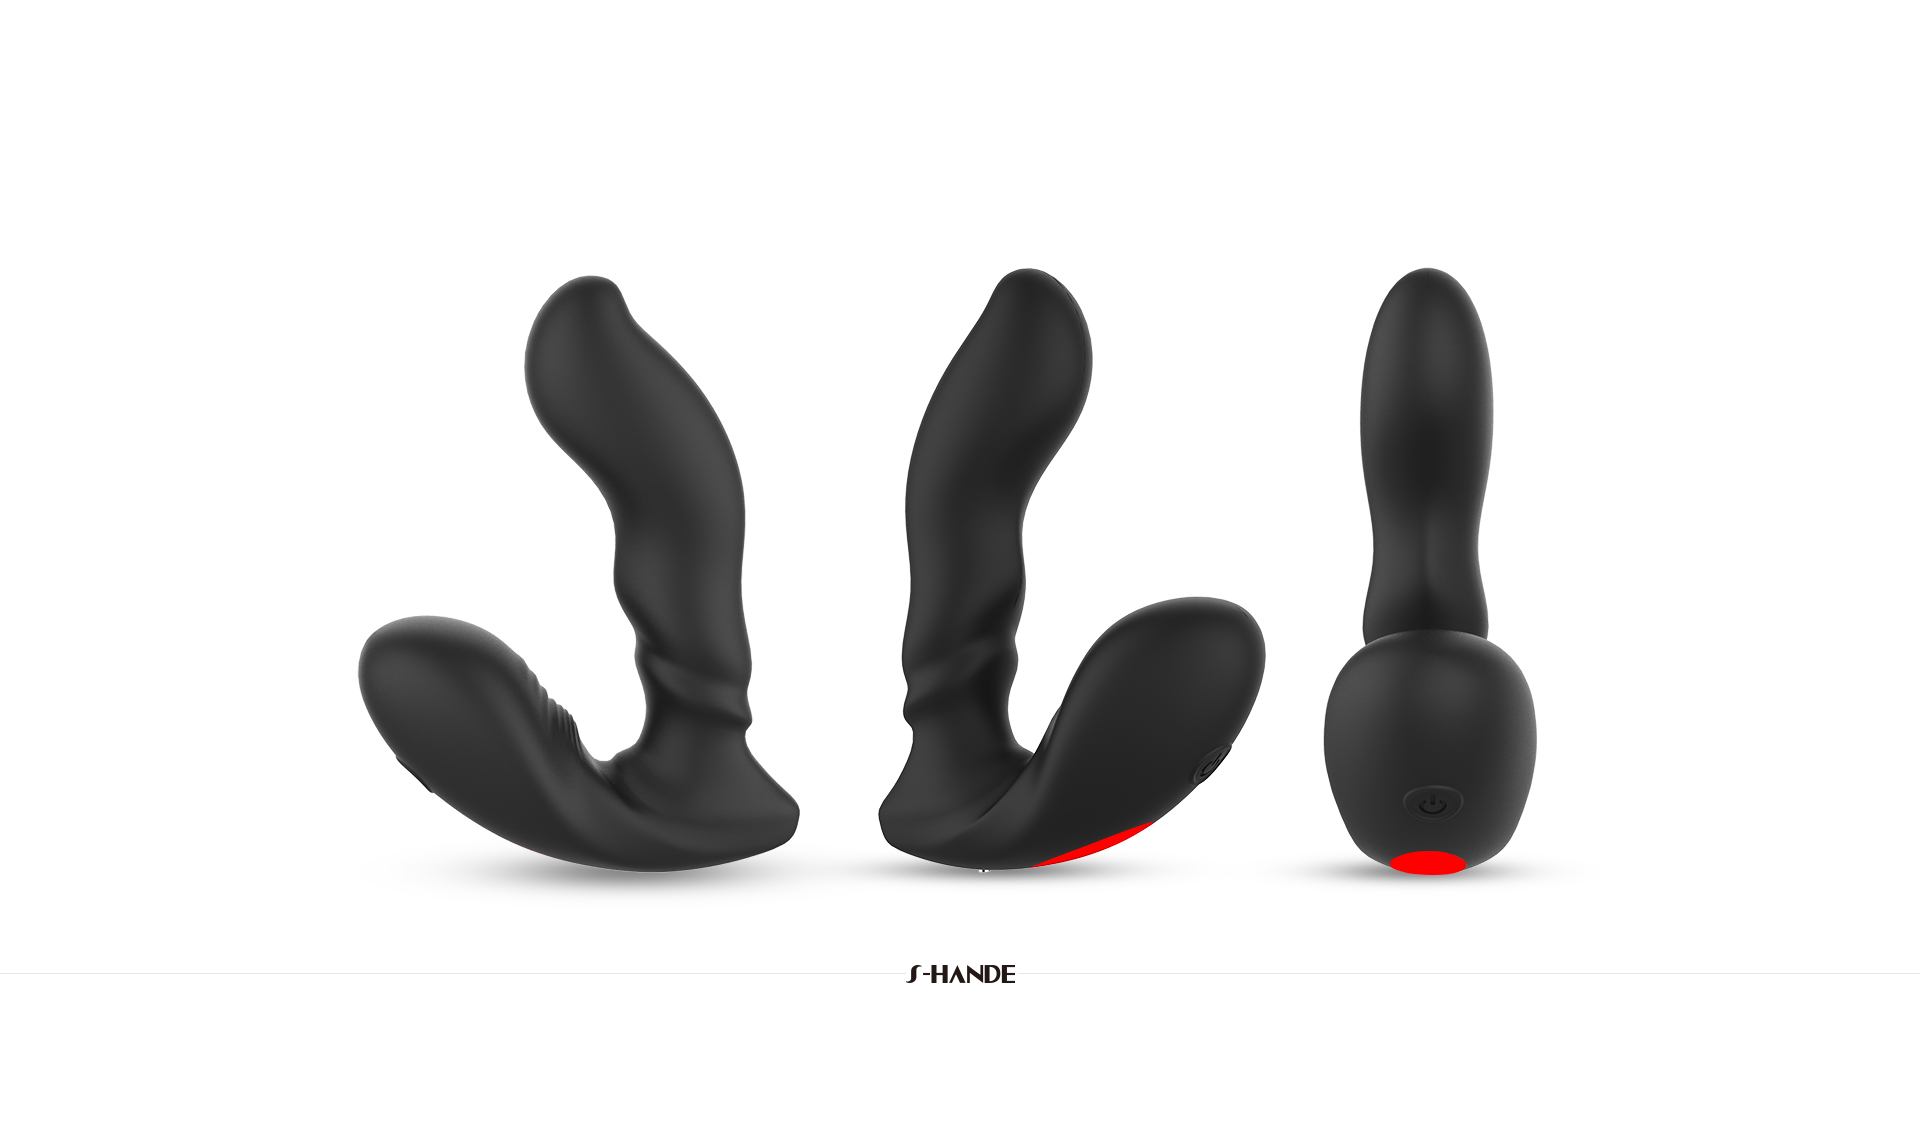 Anal Toys Anal Vibrator for Men Butt Plug Prostate Massage Double Motors Wireless Vibrator Sex Toys for Adult Erotic Toys-07